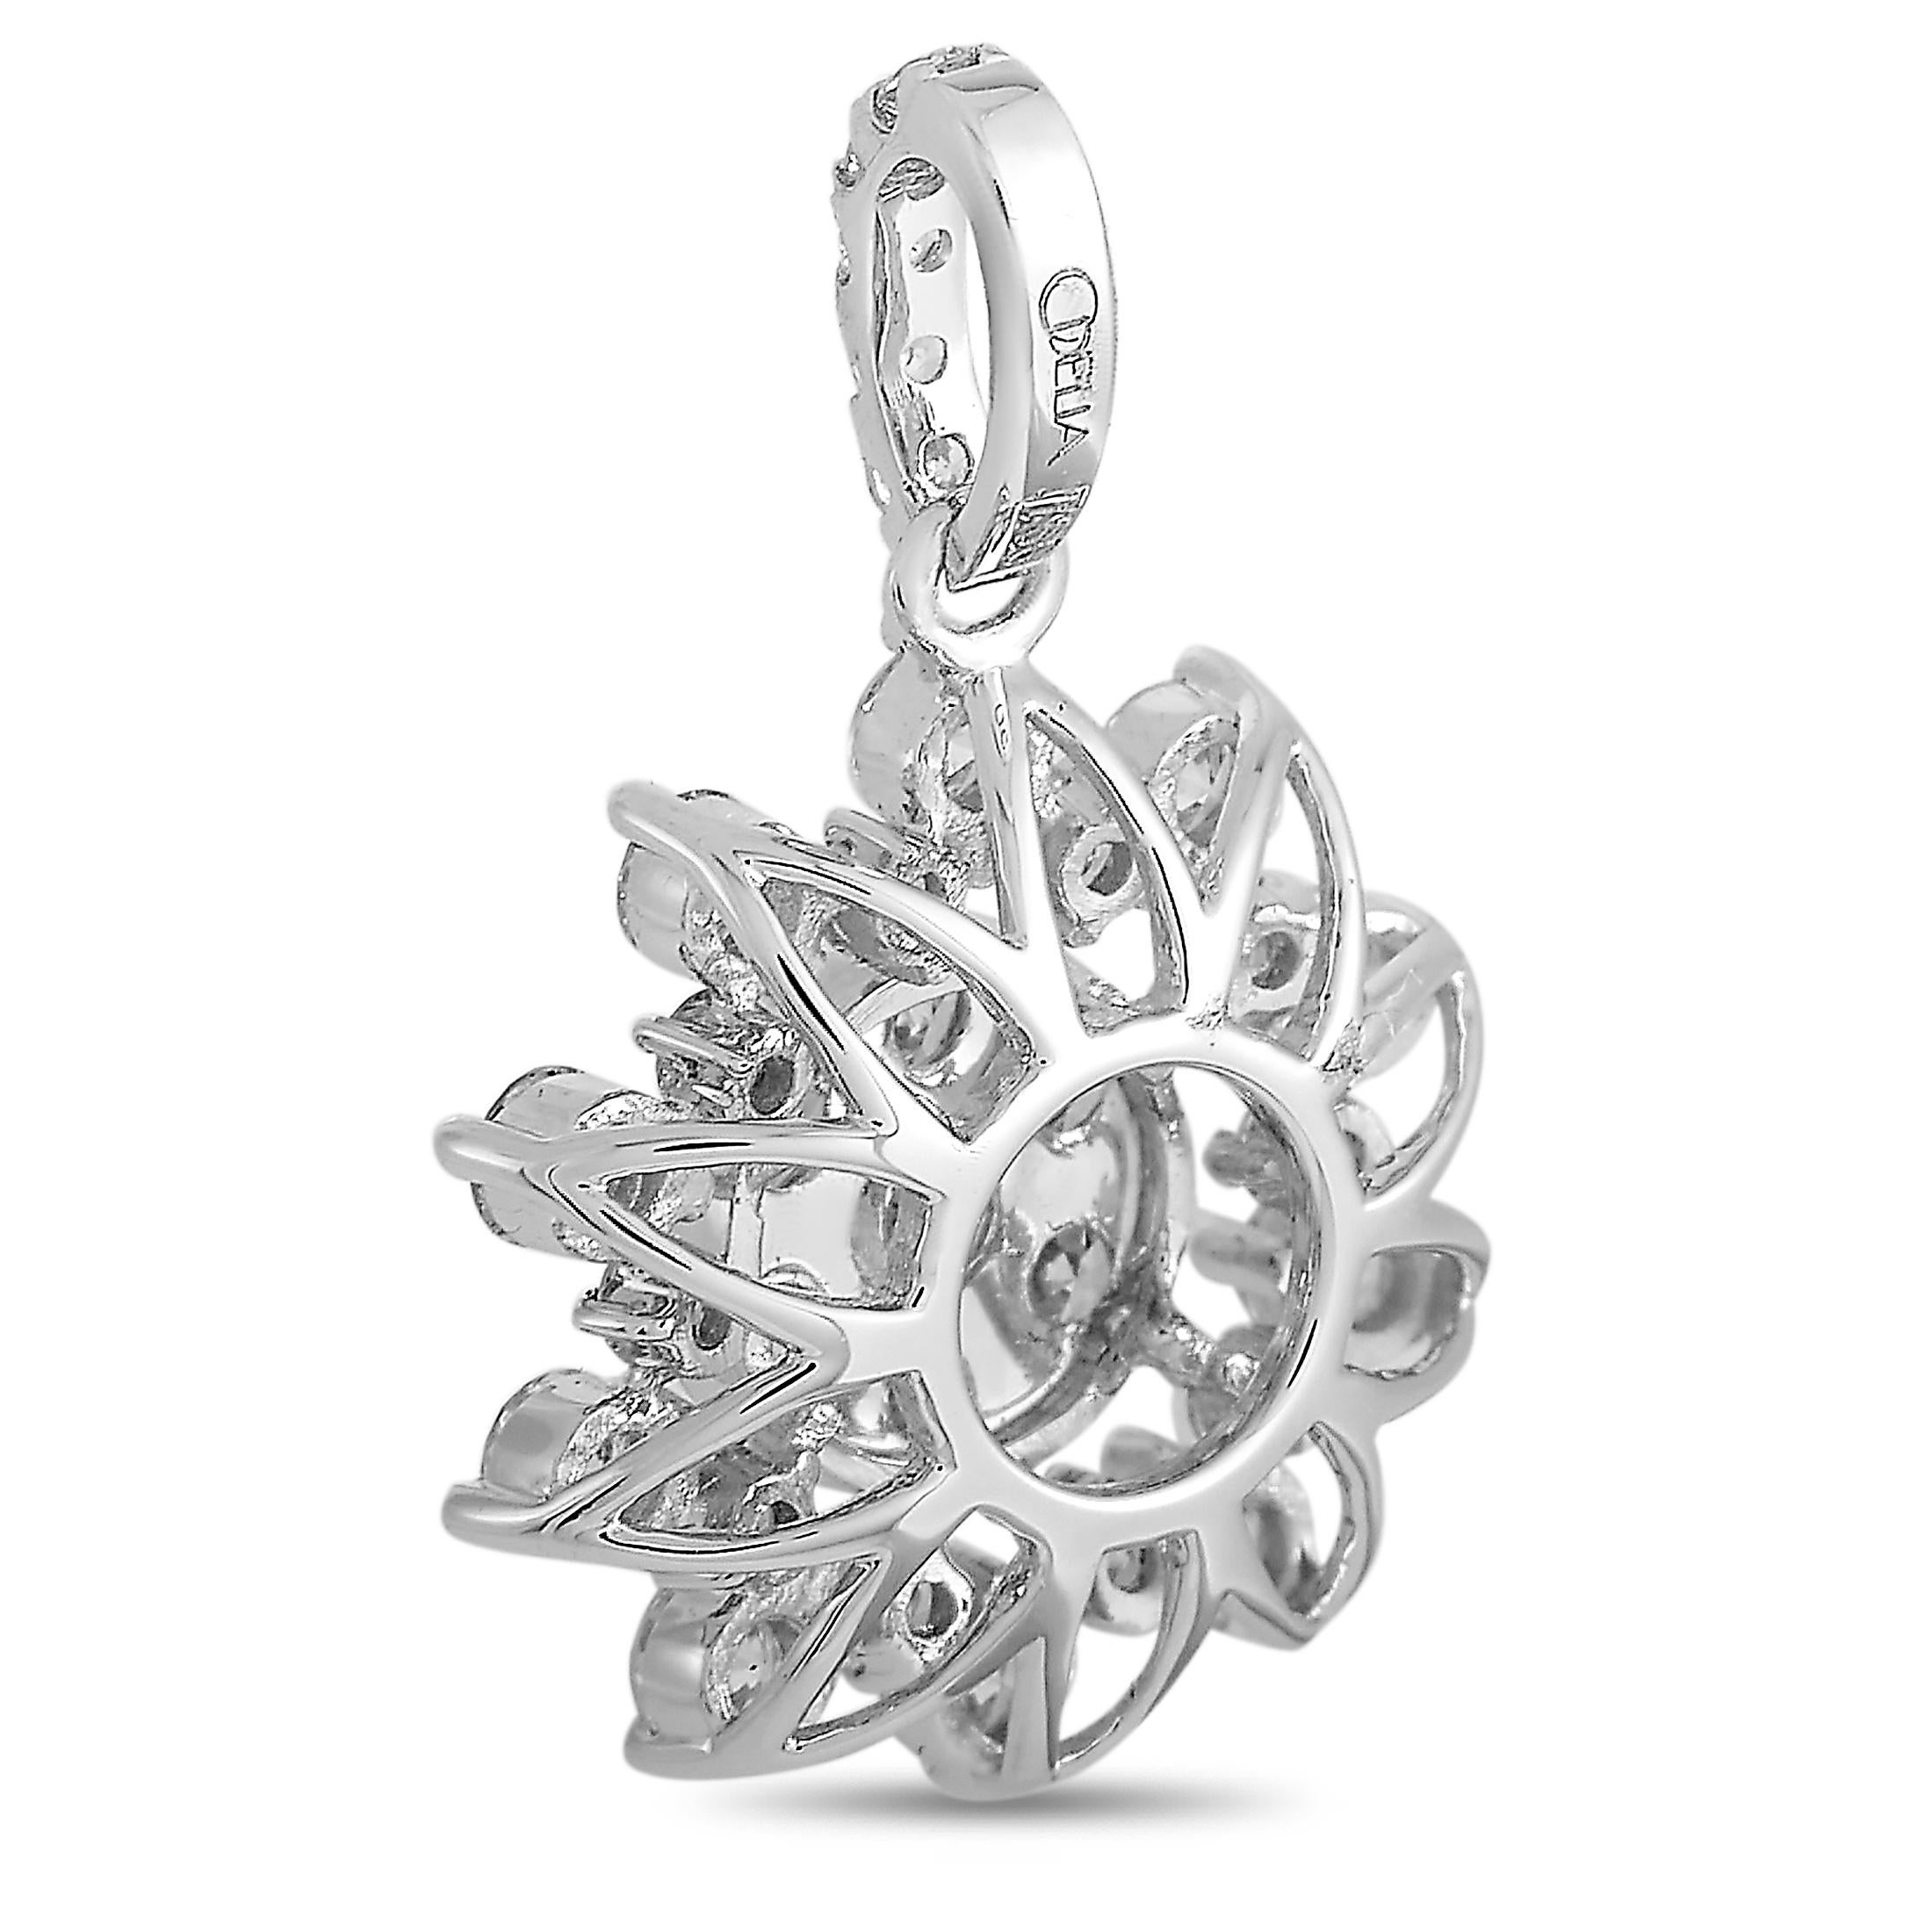 This LB Exclusive pendant is crafted from 18K white gold and weighs 1.5 grams. It measures 0.75” in length and 0.60” in width. The pendant is set with diamonds that total 0.77 carats.
 
 Offered in brand new condition, this item includes a gift box.